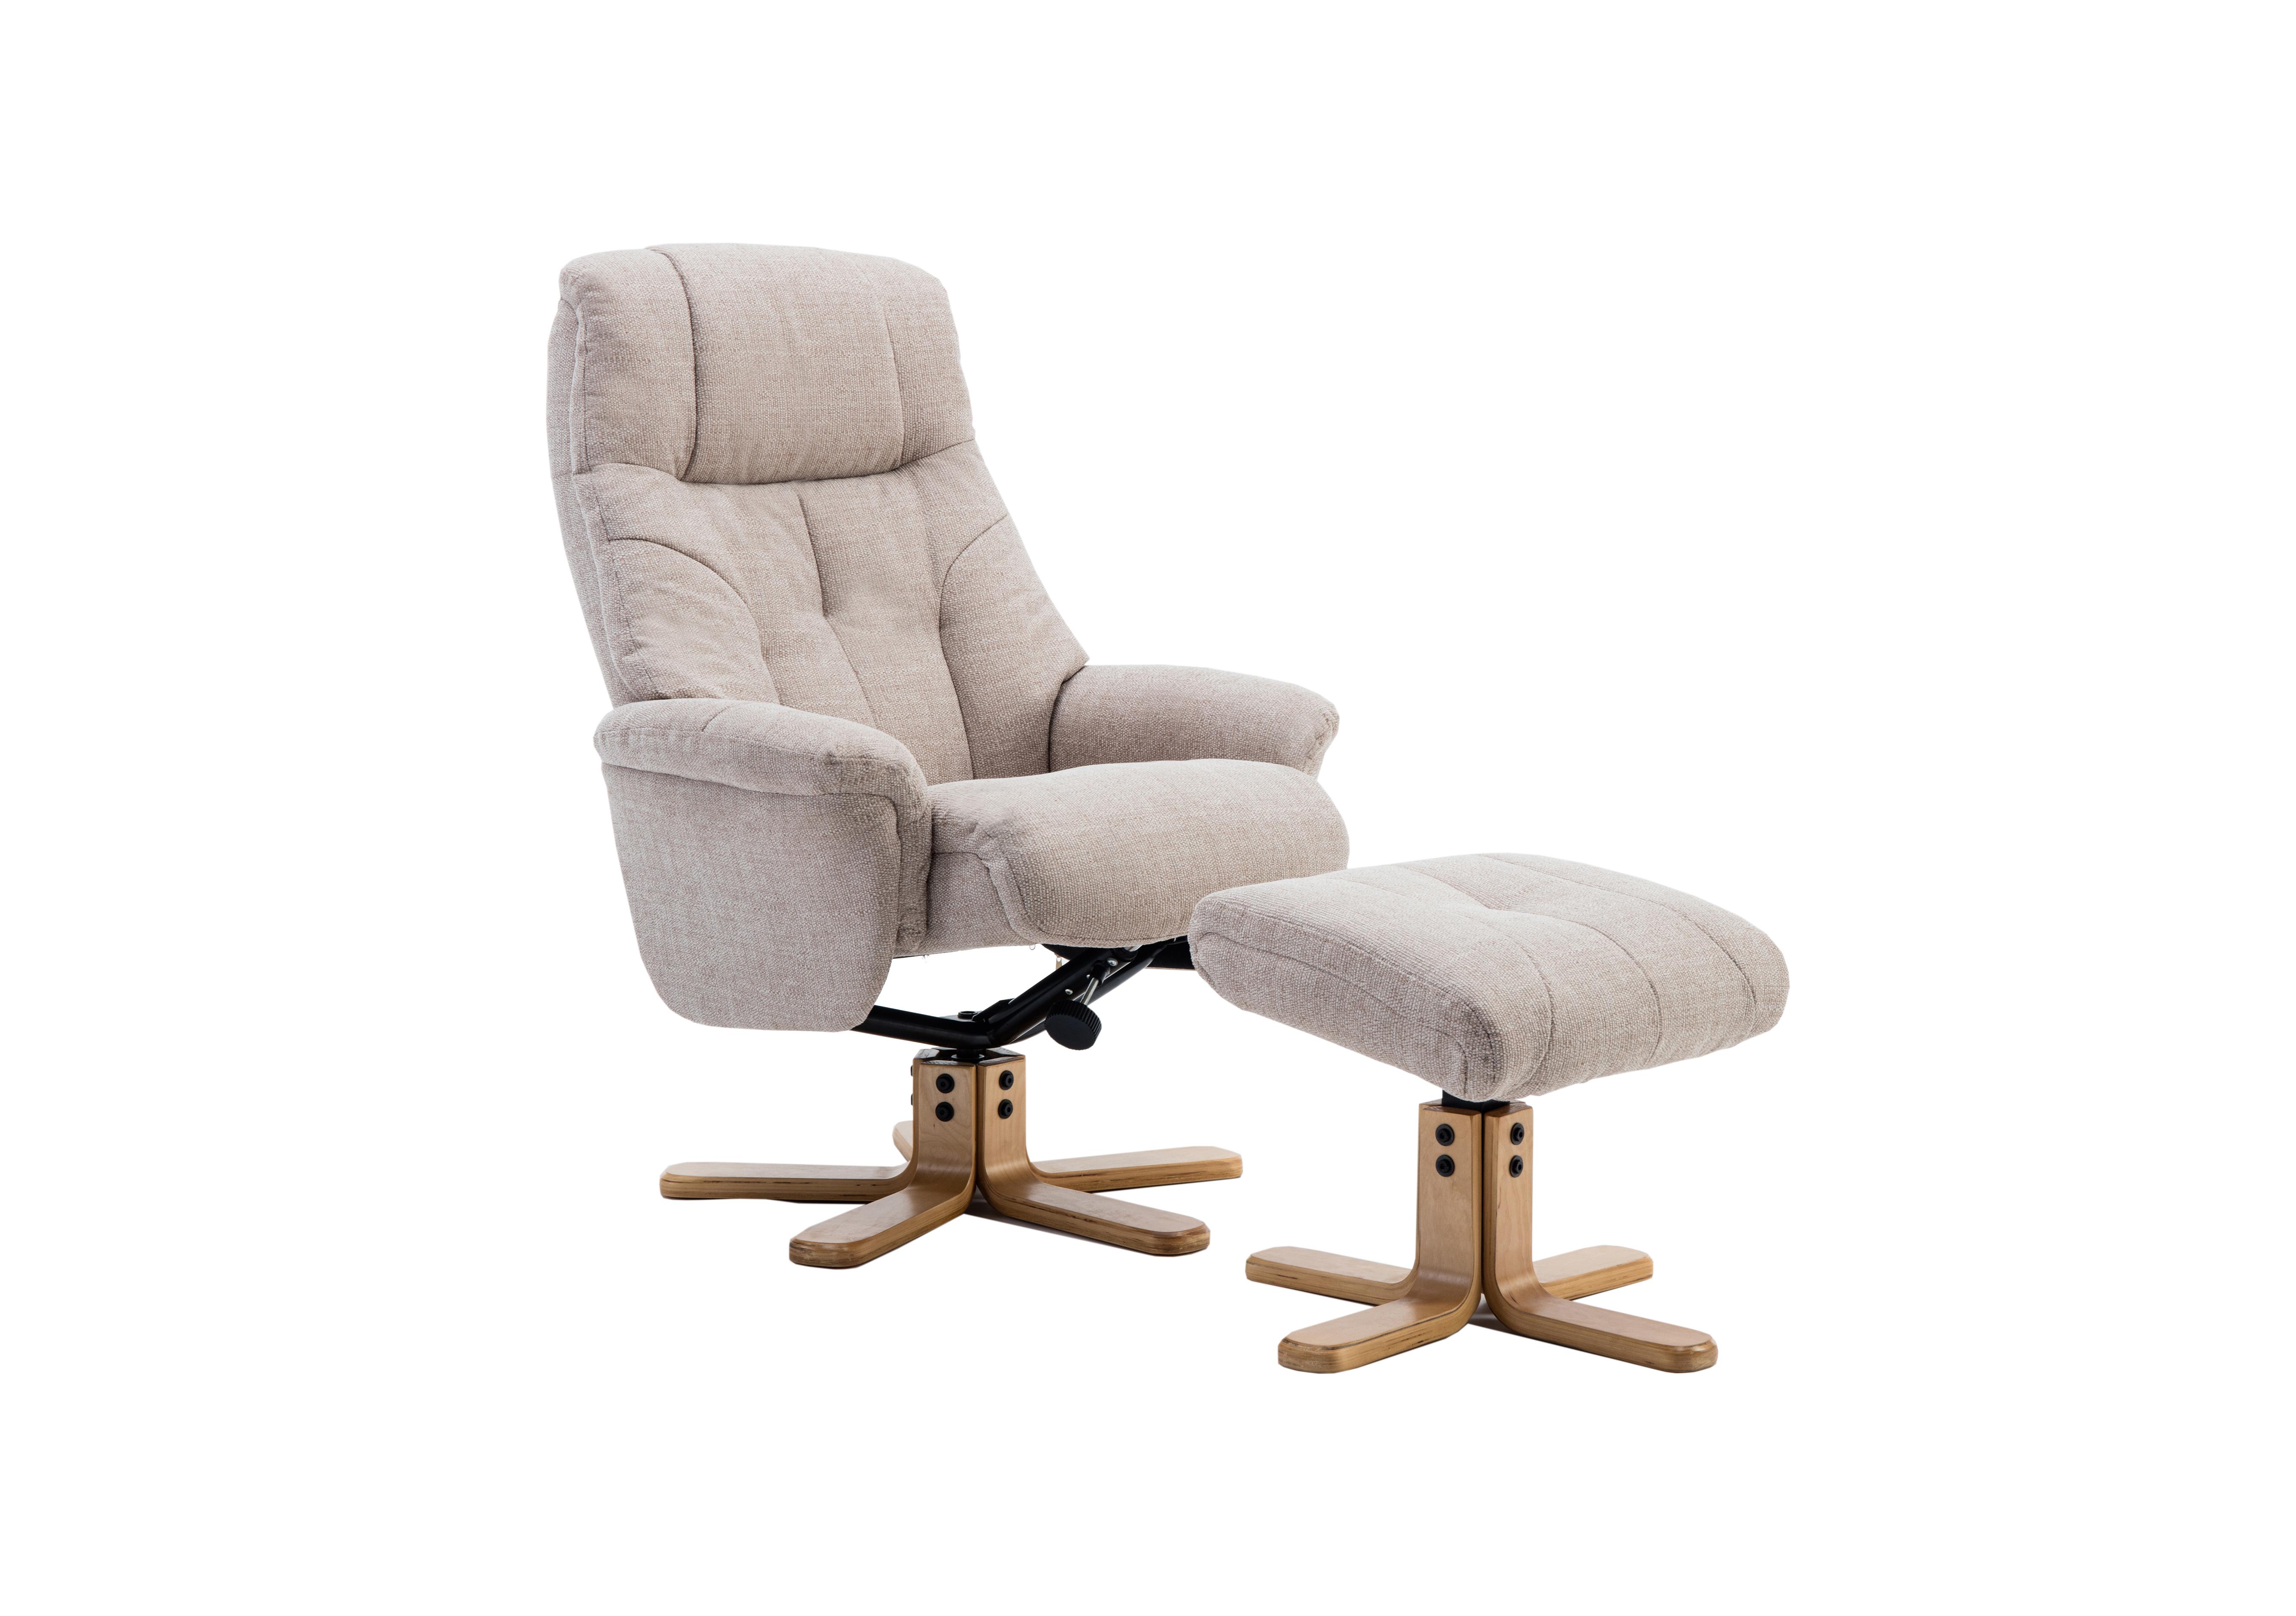 Muscat Fabric Swivel Recliner Chair with Footstool in Lisbon Wheat on Furniture Village